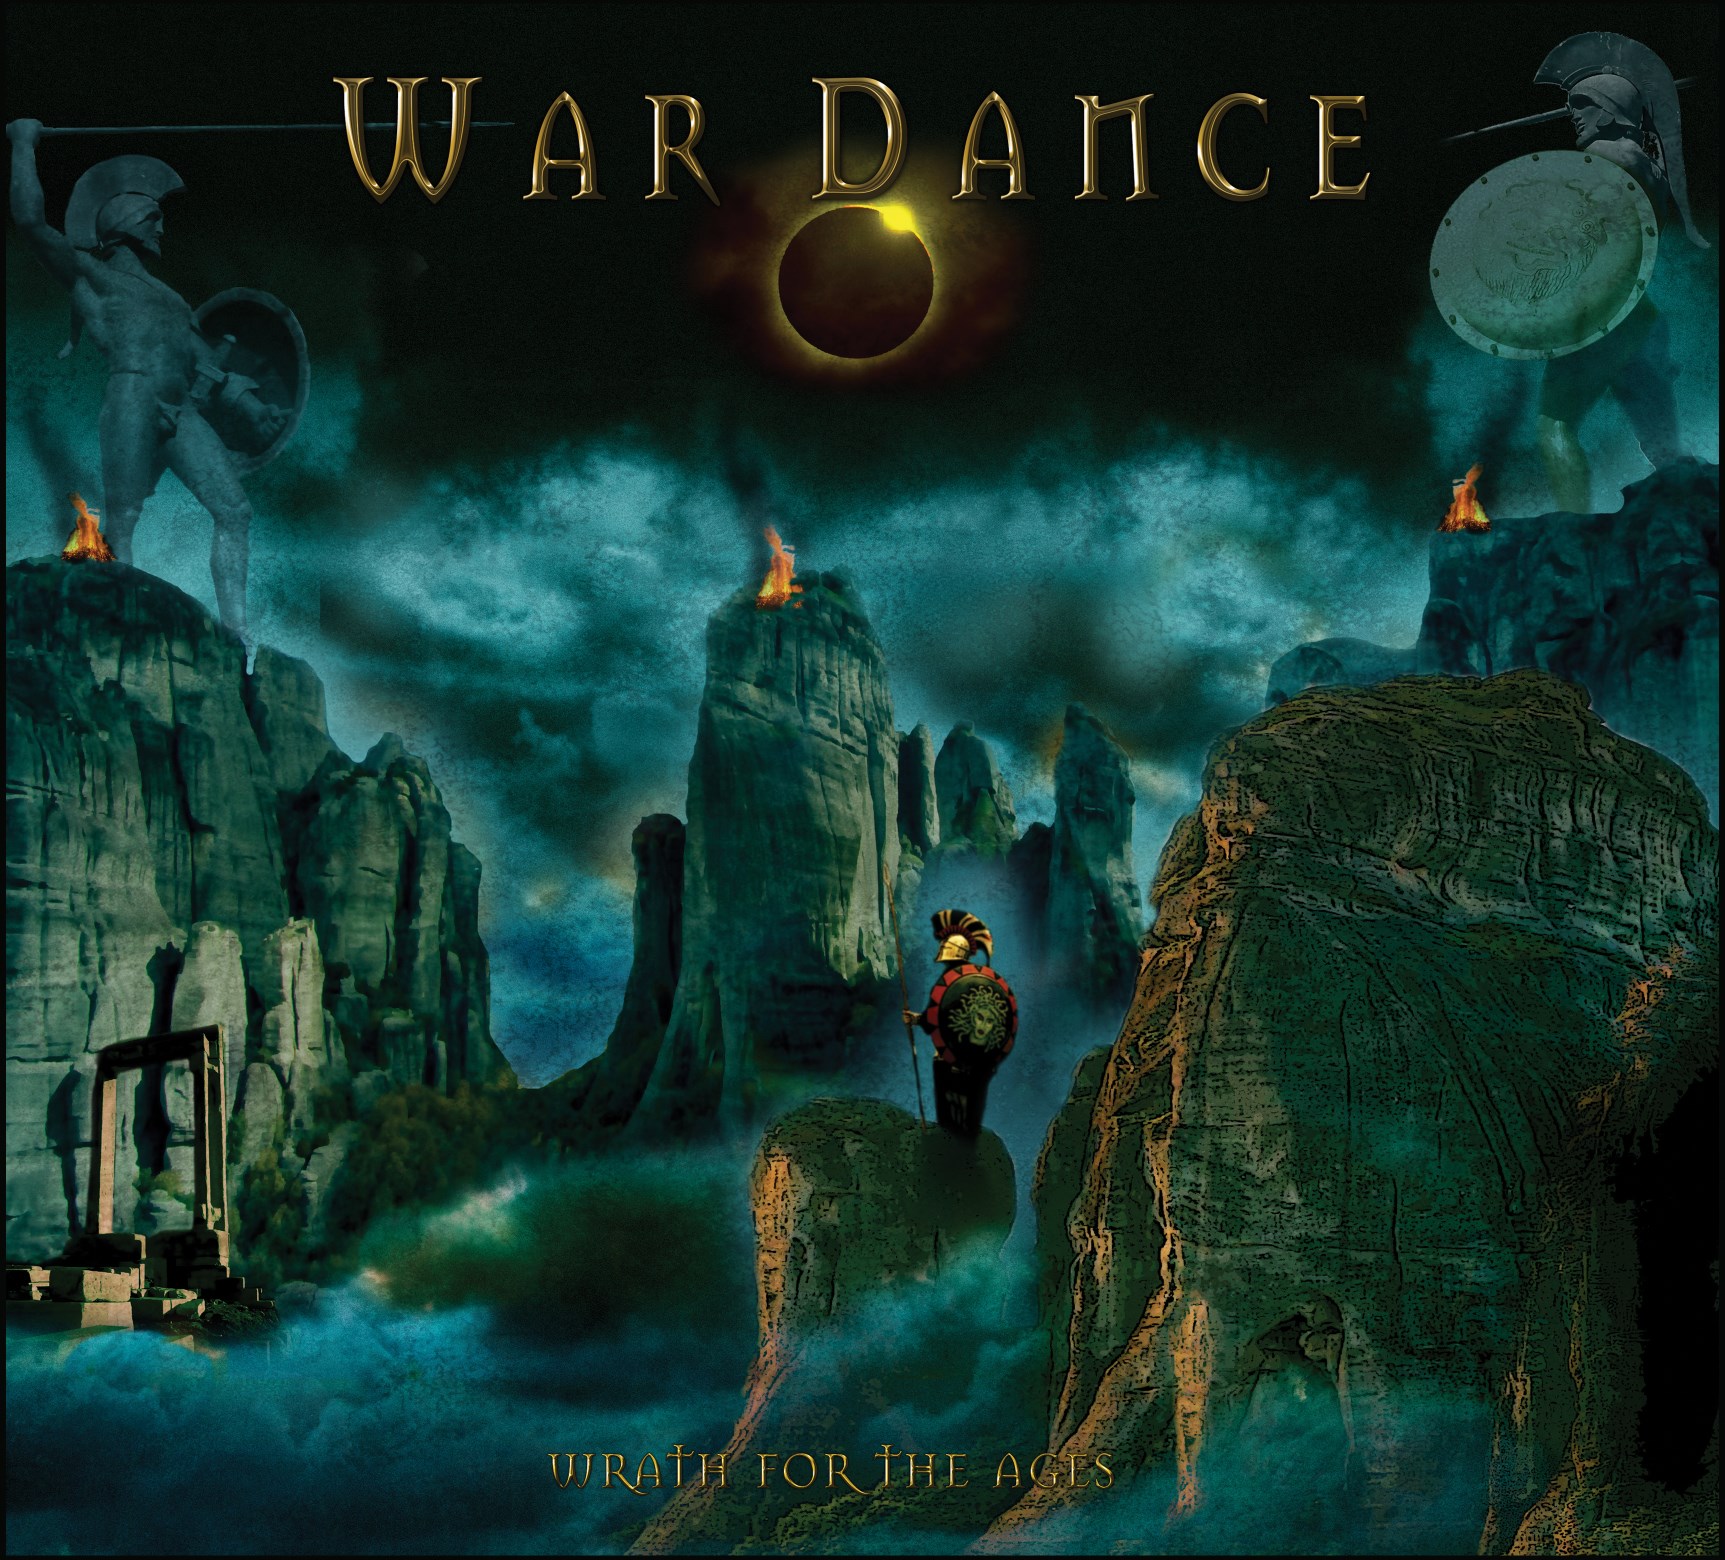 WAR DANCE Wrath for the ages CD (SEALED) LAST COPIES!